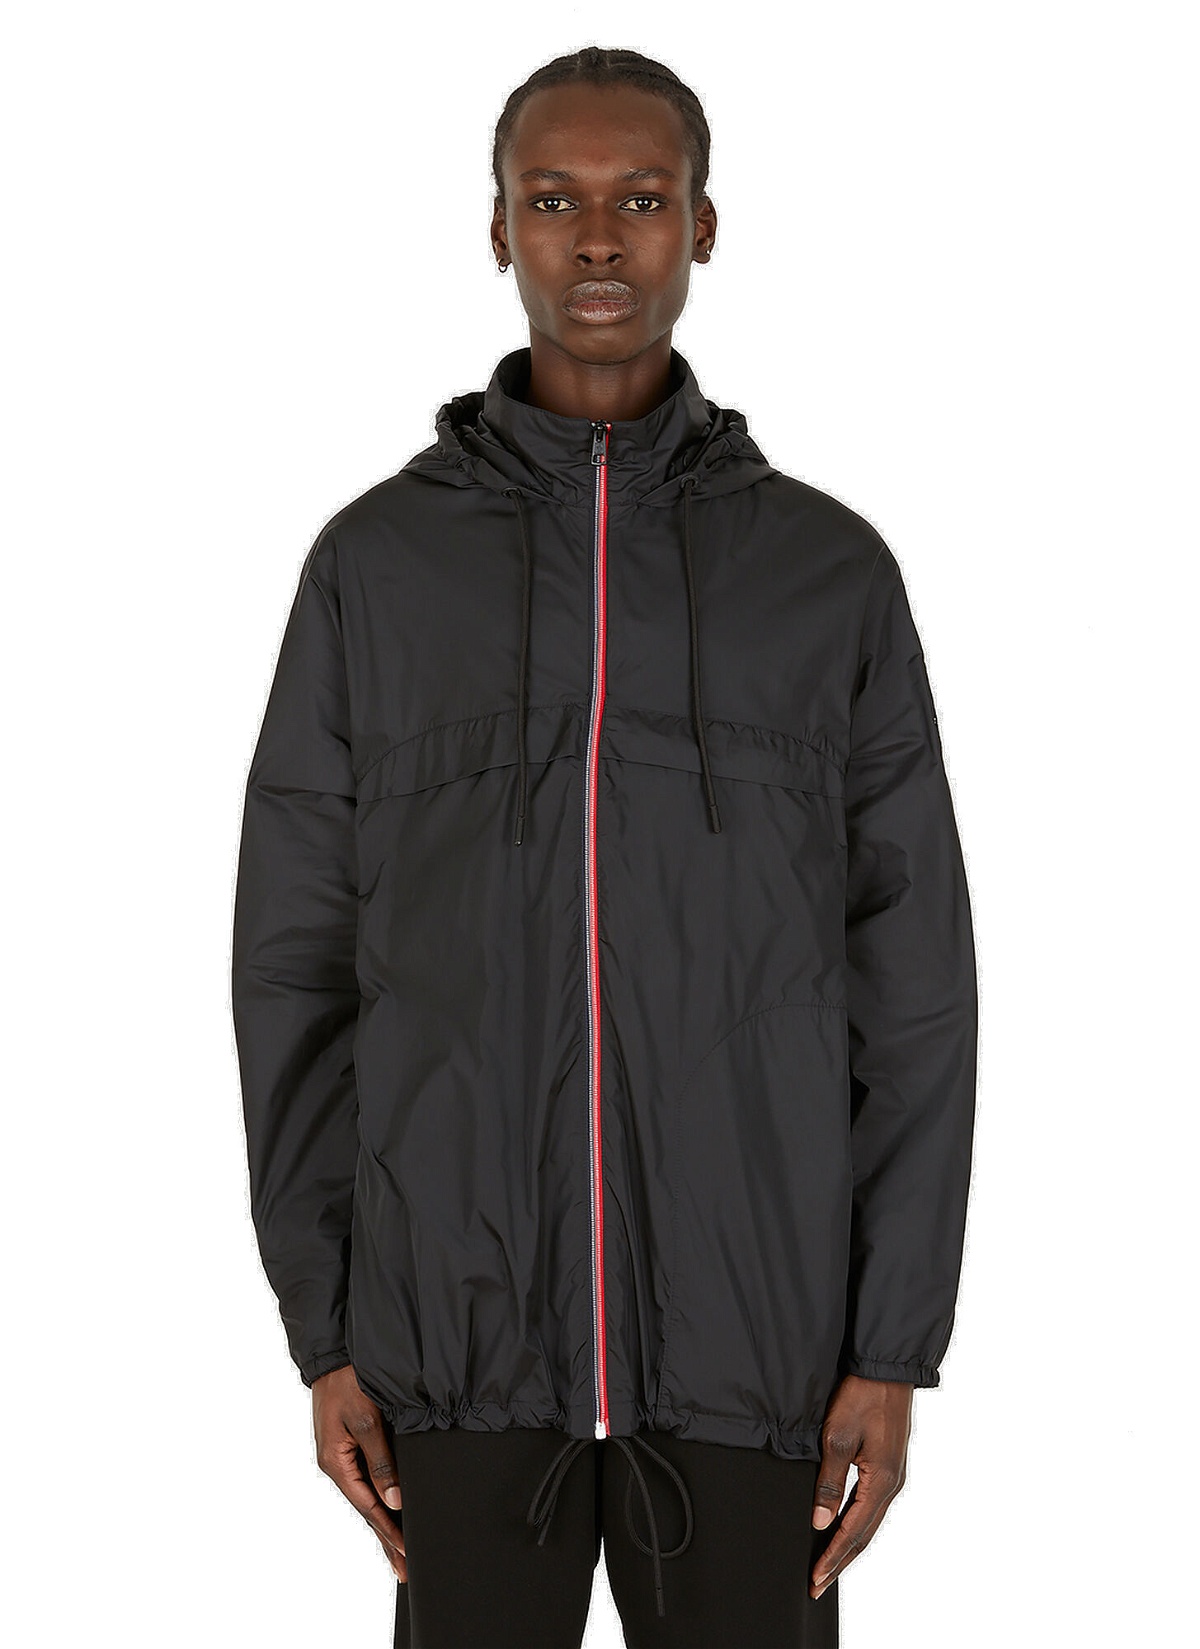 Chahed Jacket in Black Moncler